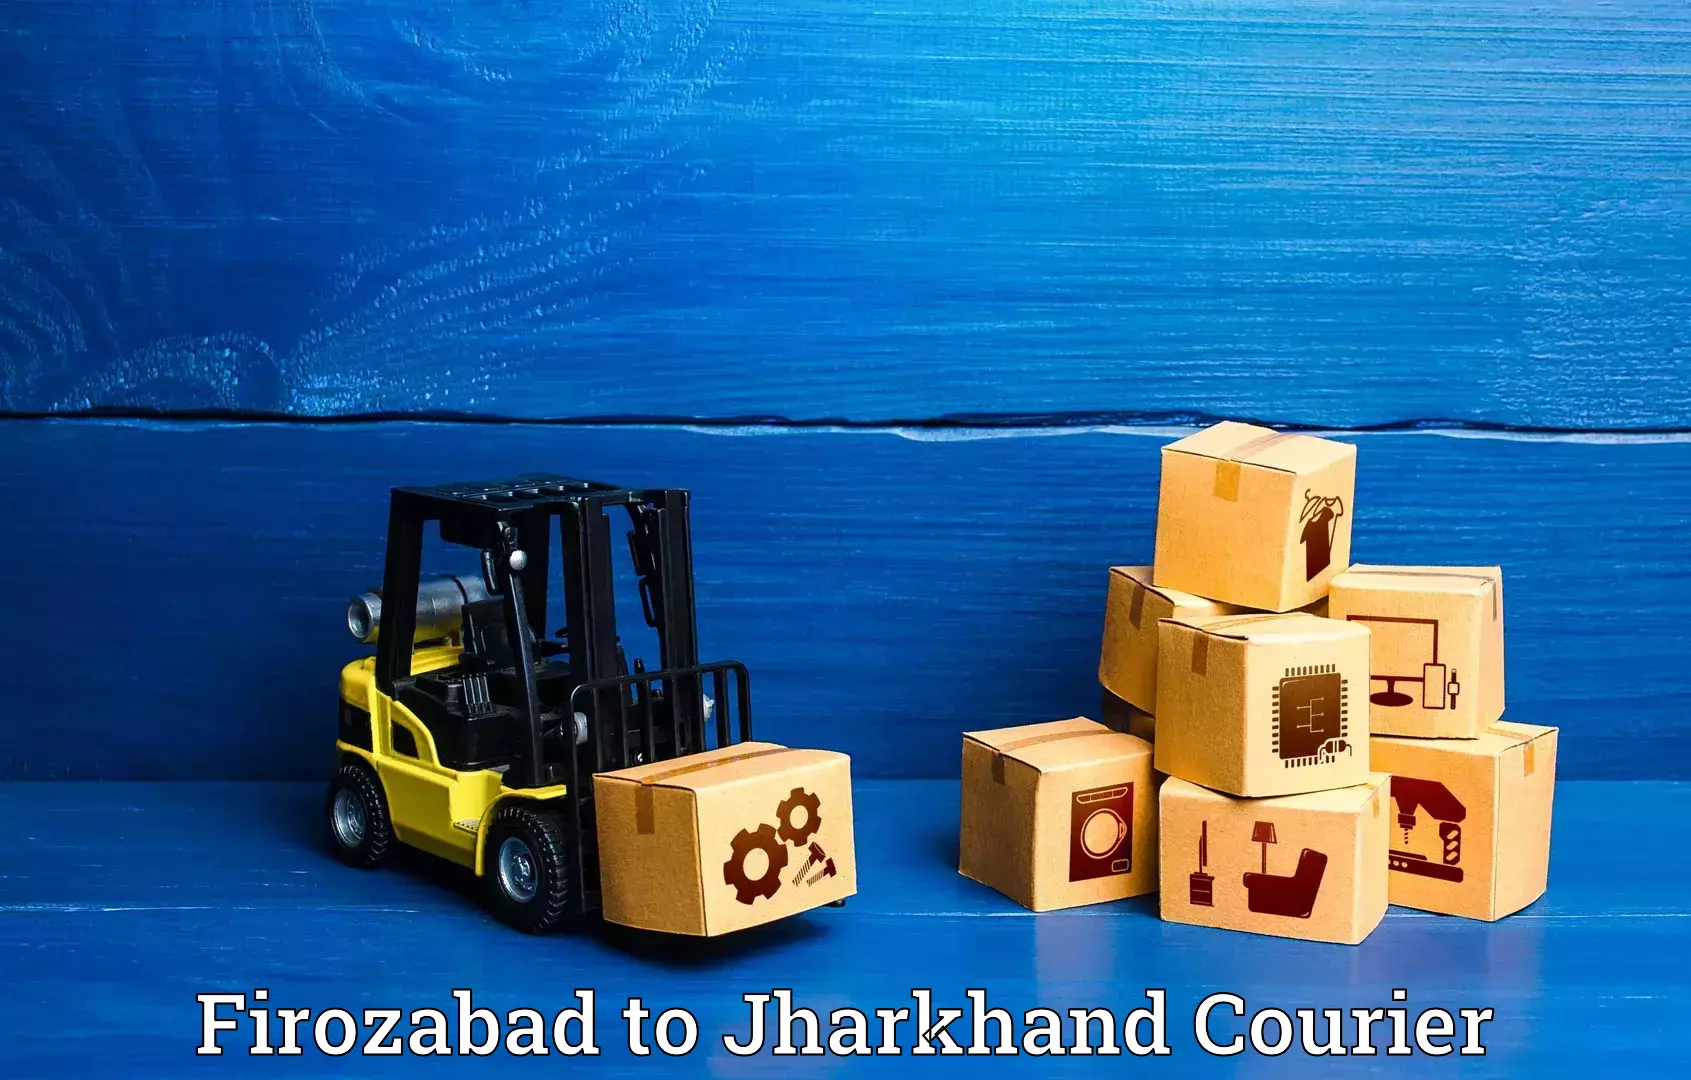 Luggage shipping planner Firozabad to Peterbar